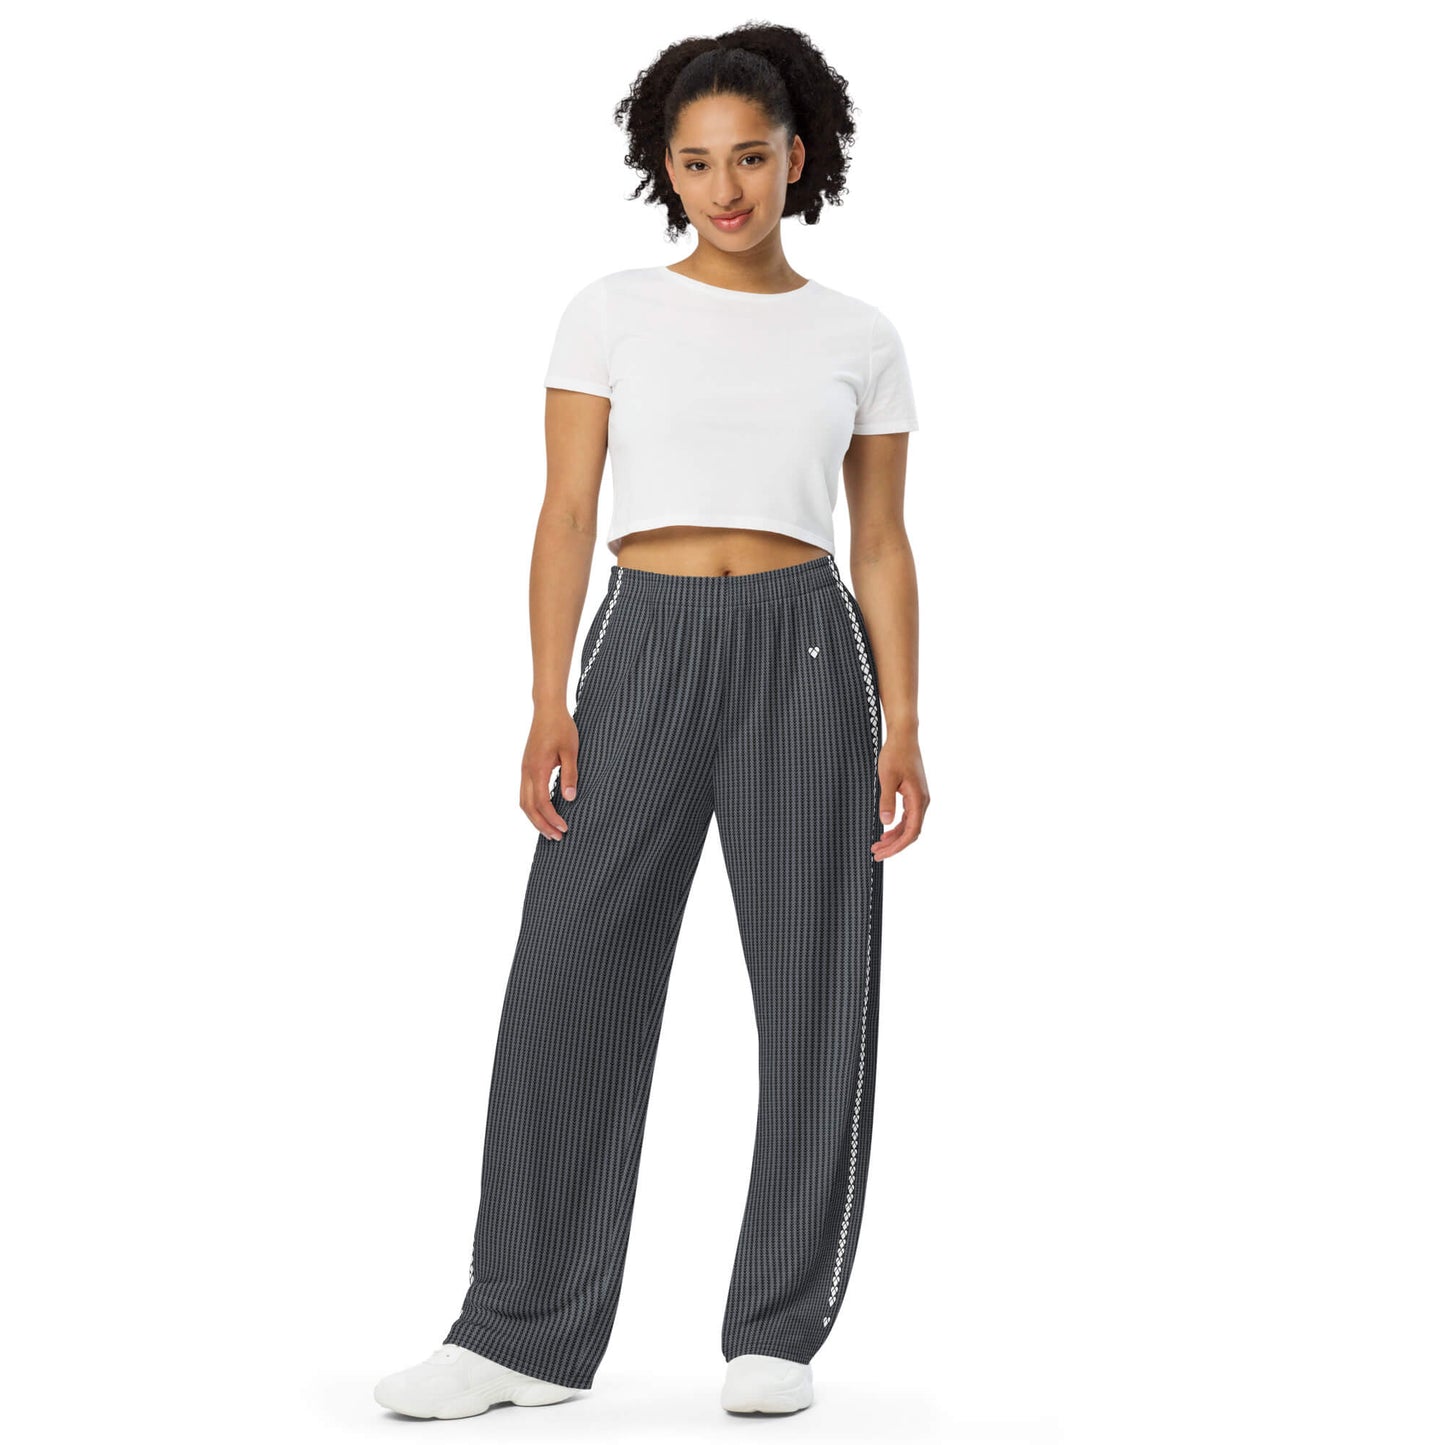 CRiZ AMOR's Heartbeat Pants for Comfort and Style